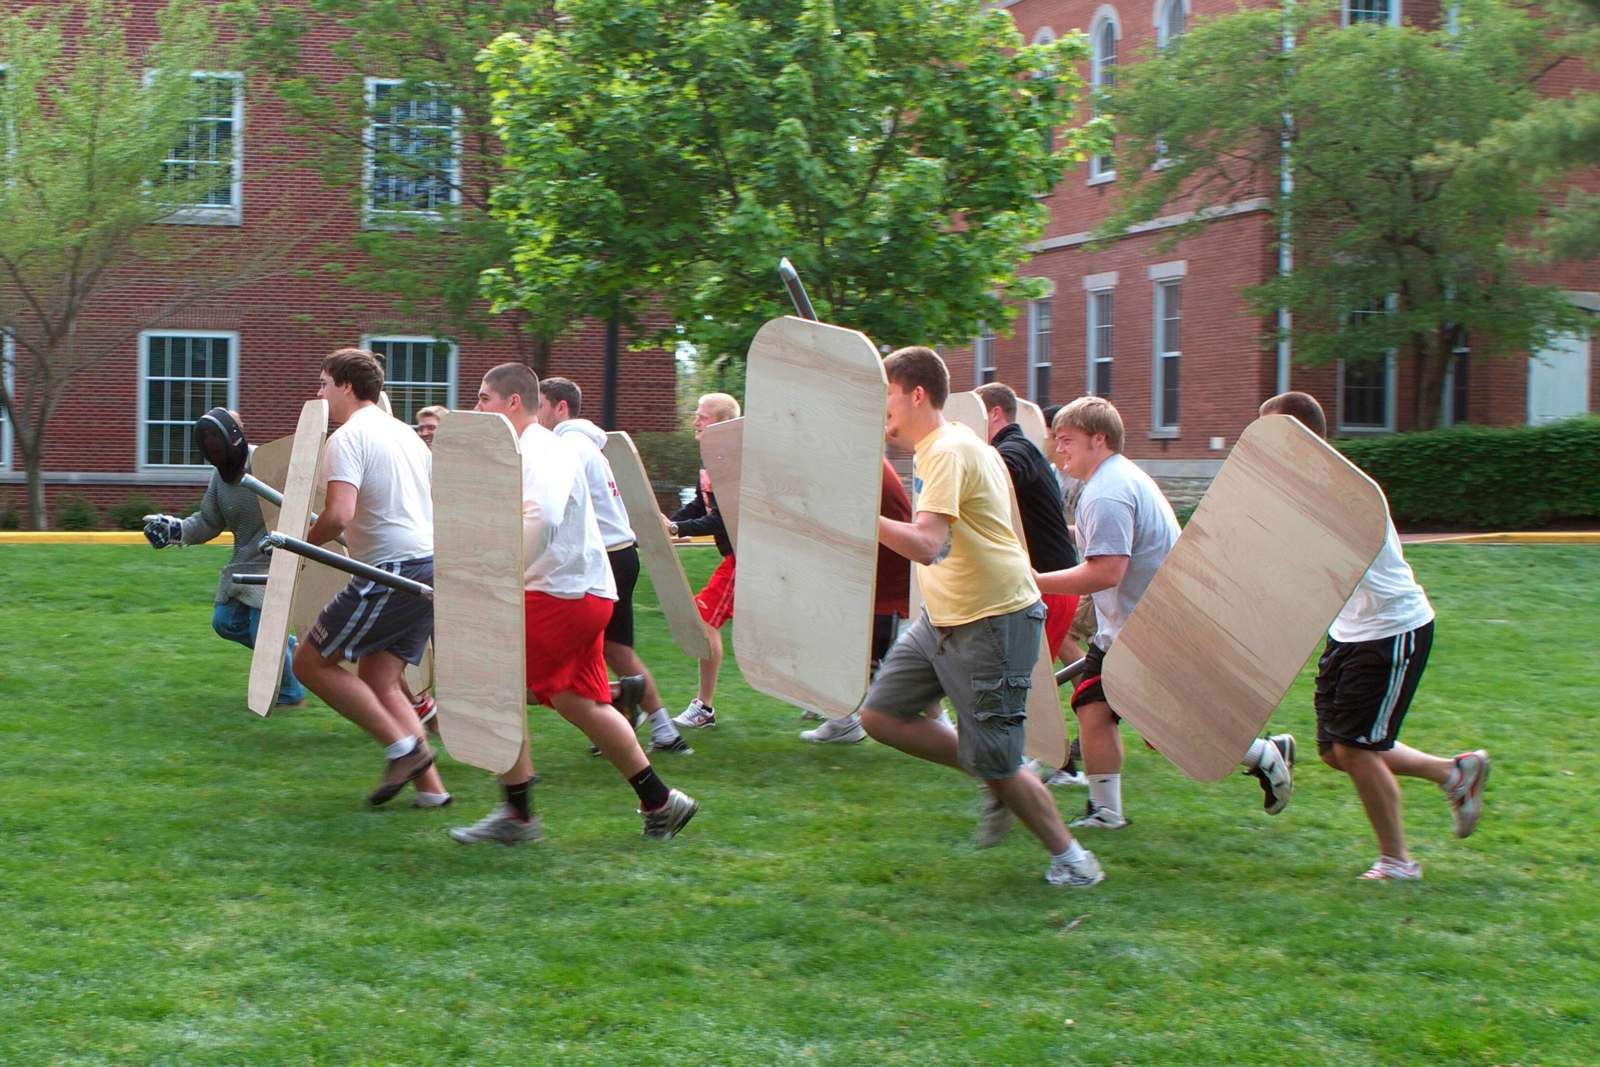 a group of people holding shields